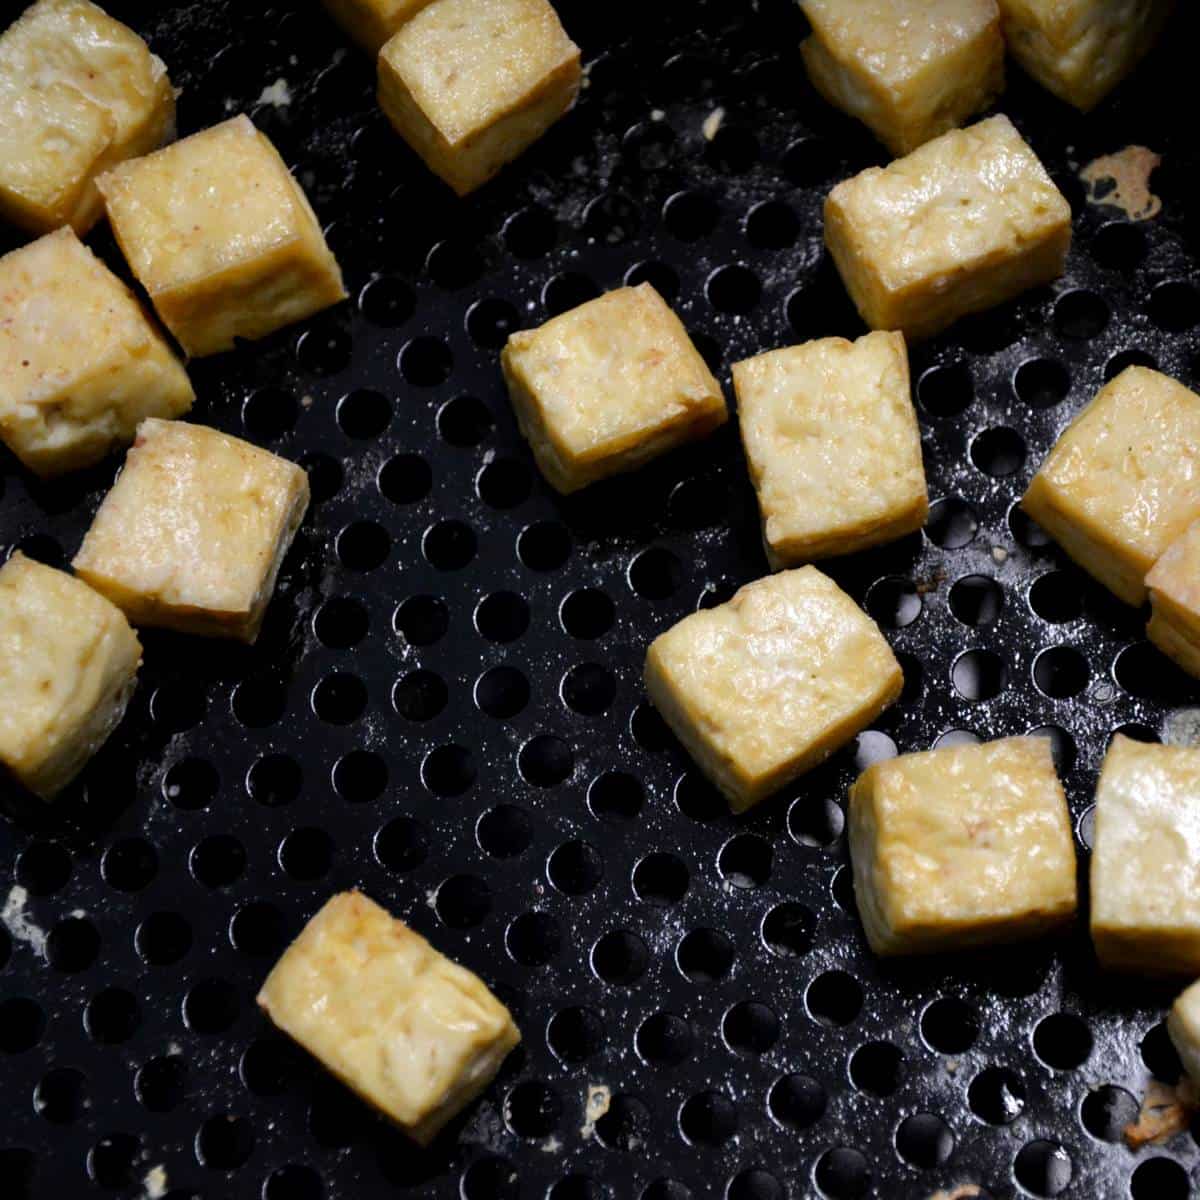 tofu cooked and browned via air fryer.